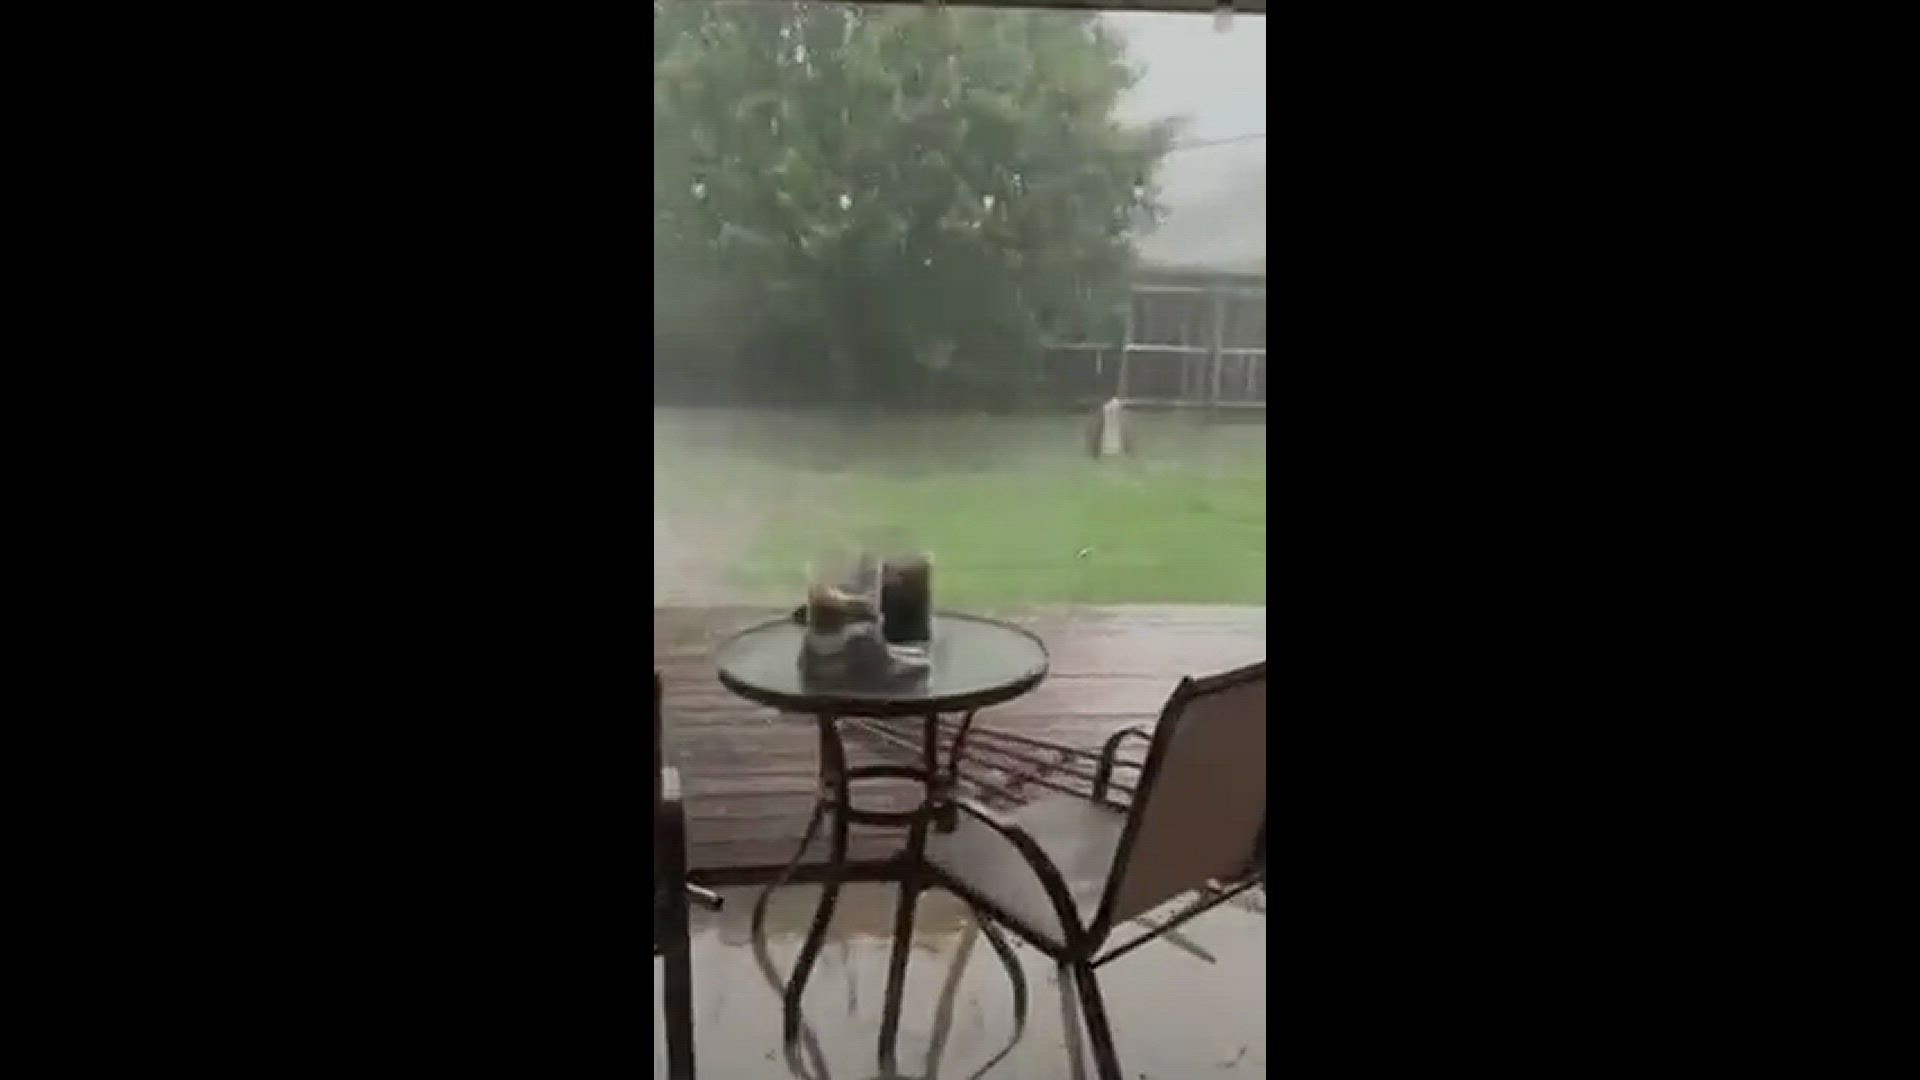 Hail falls outside a home in Killeen
Credit: Valerie King